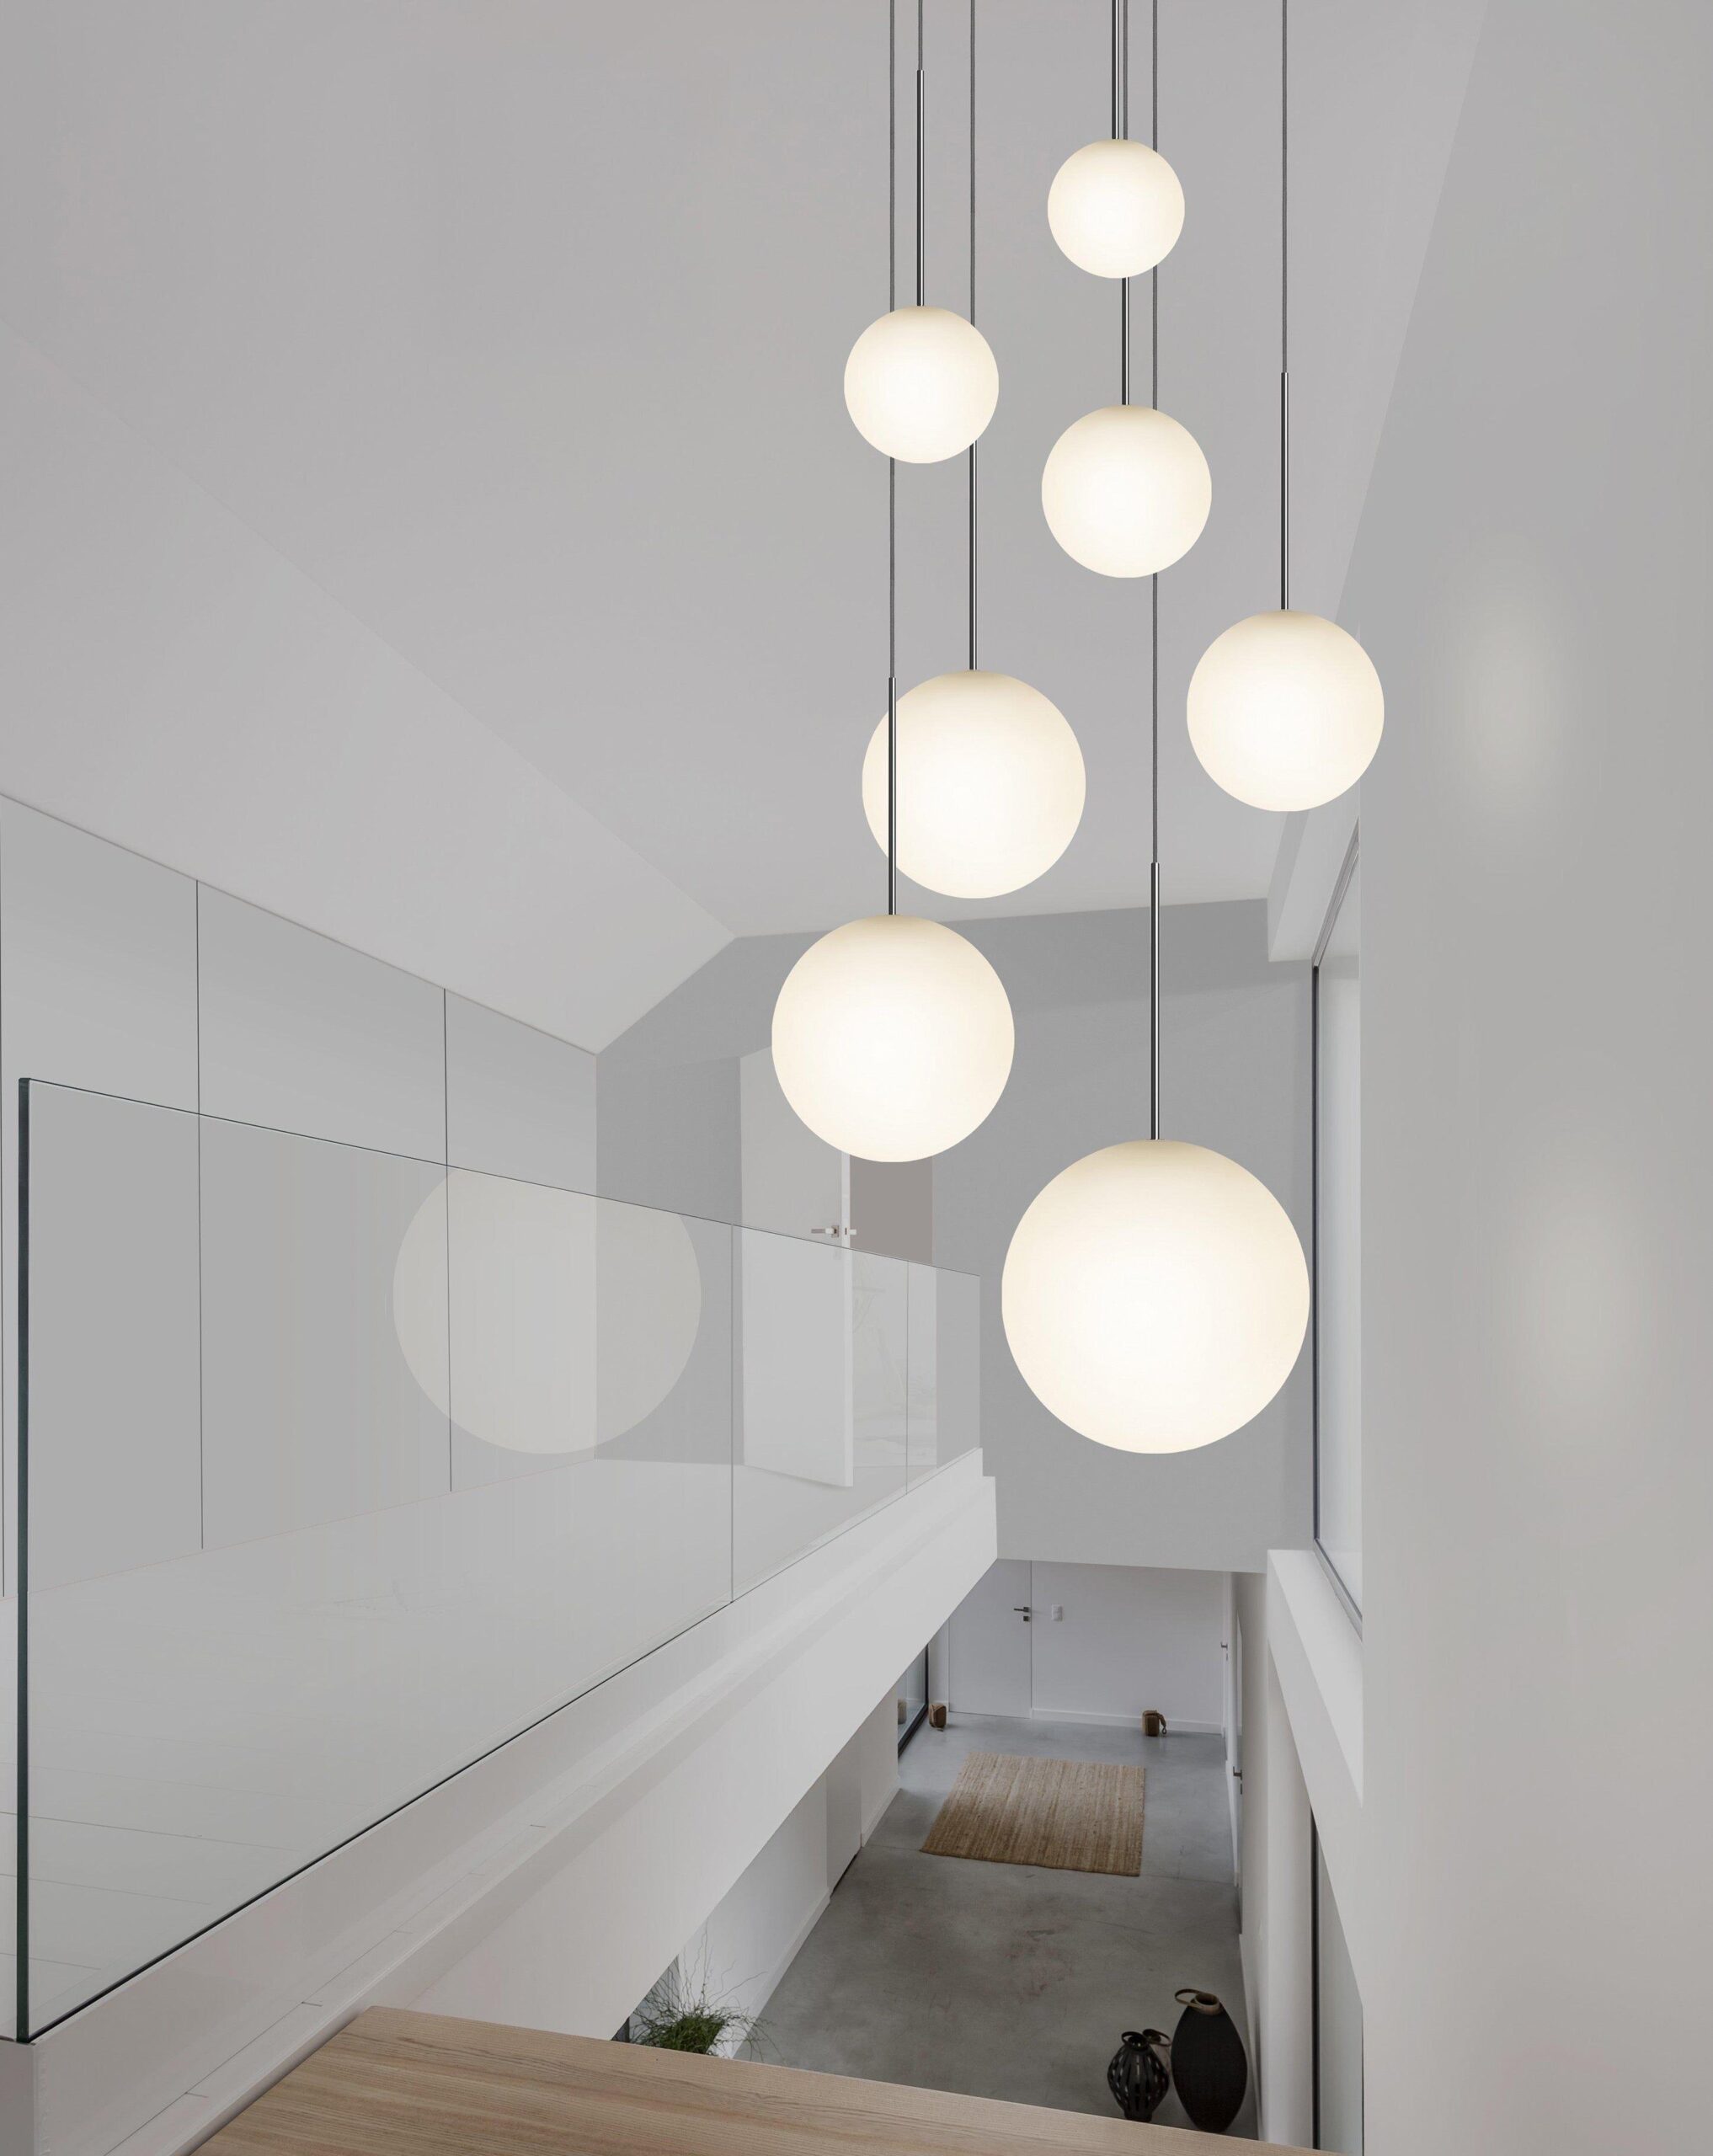 Lighting For The Home Illuminate Your Living Space with Stylish and Functional Lighting Options